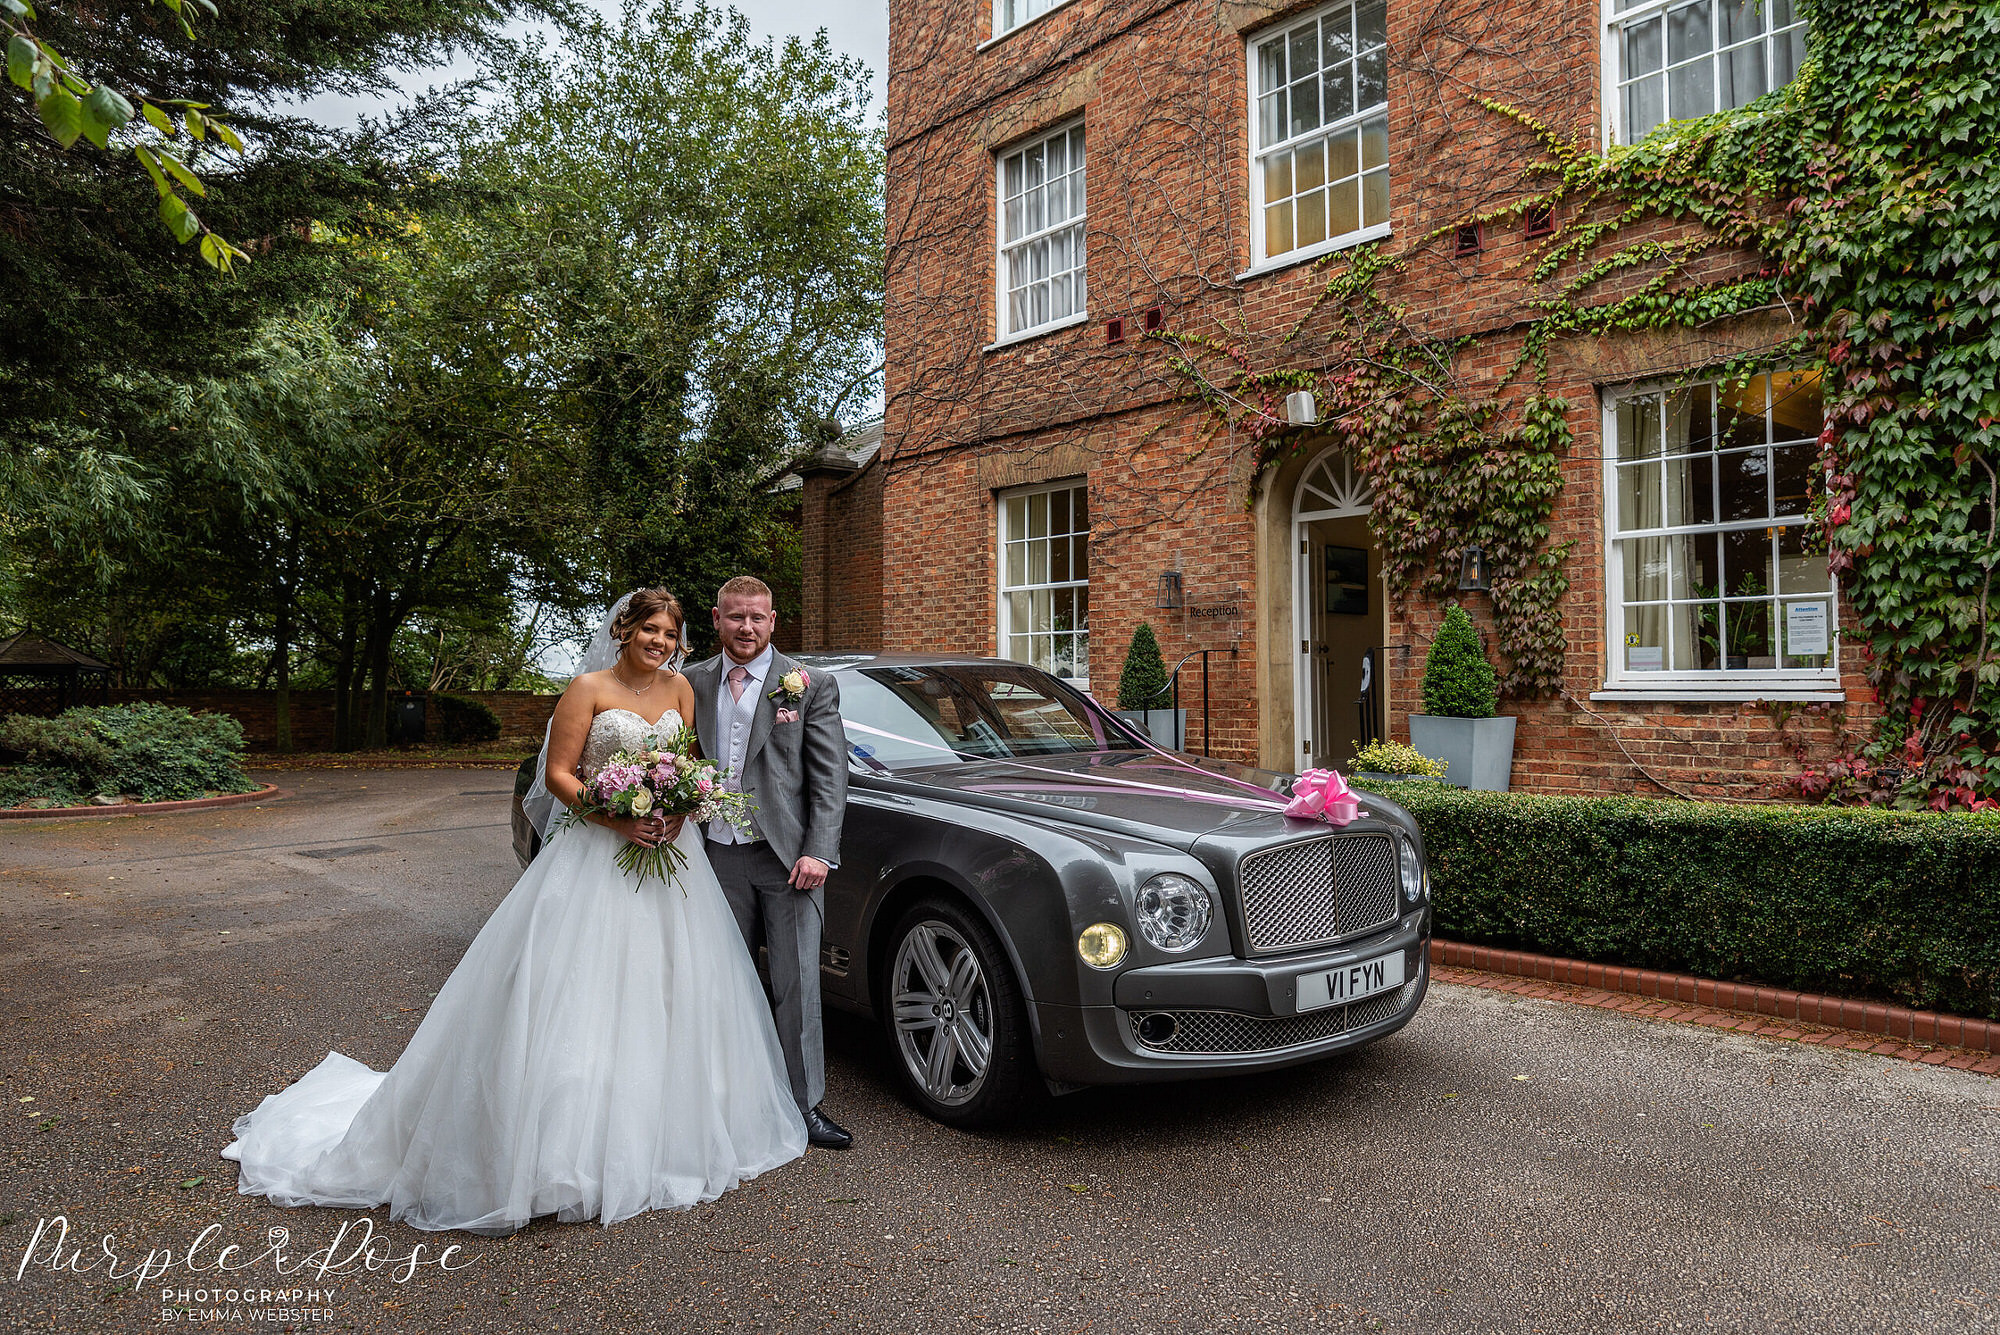 Photo of ride and groom by the wedding car in front of the wedding venue in Milton Keynes